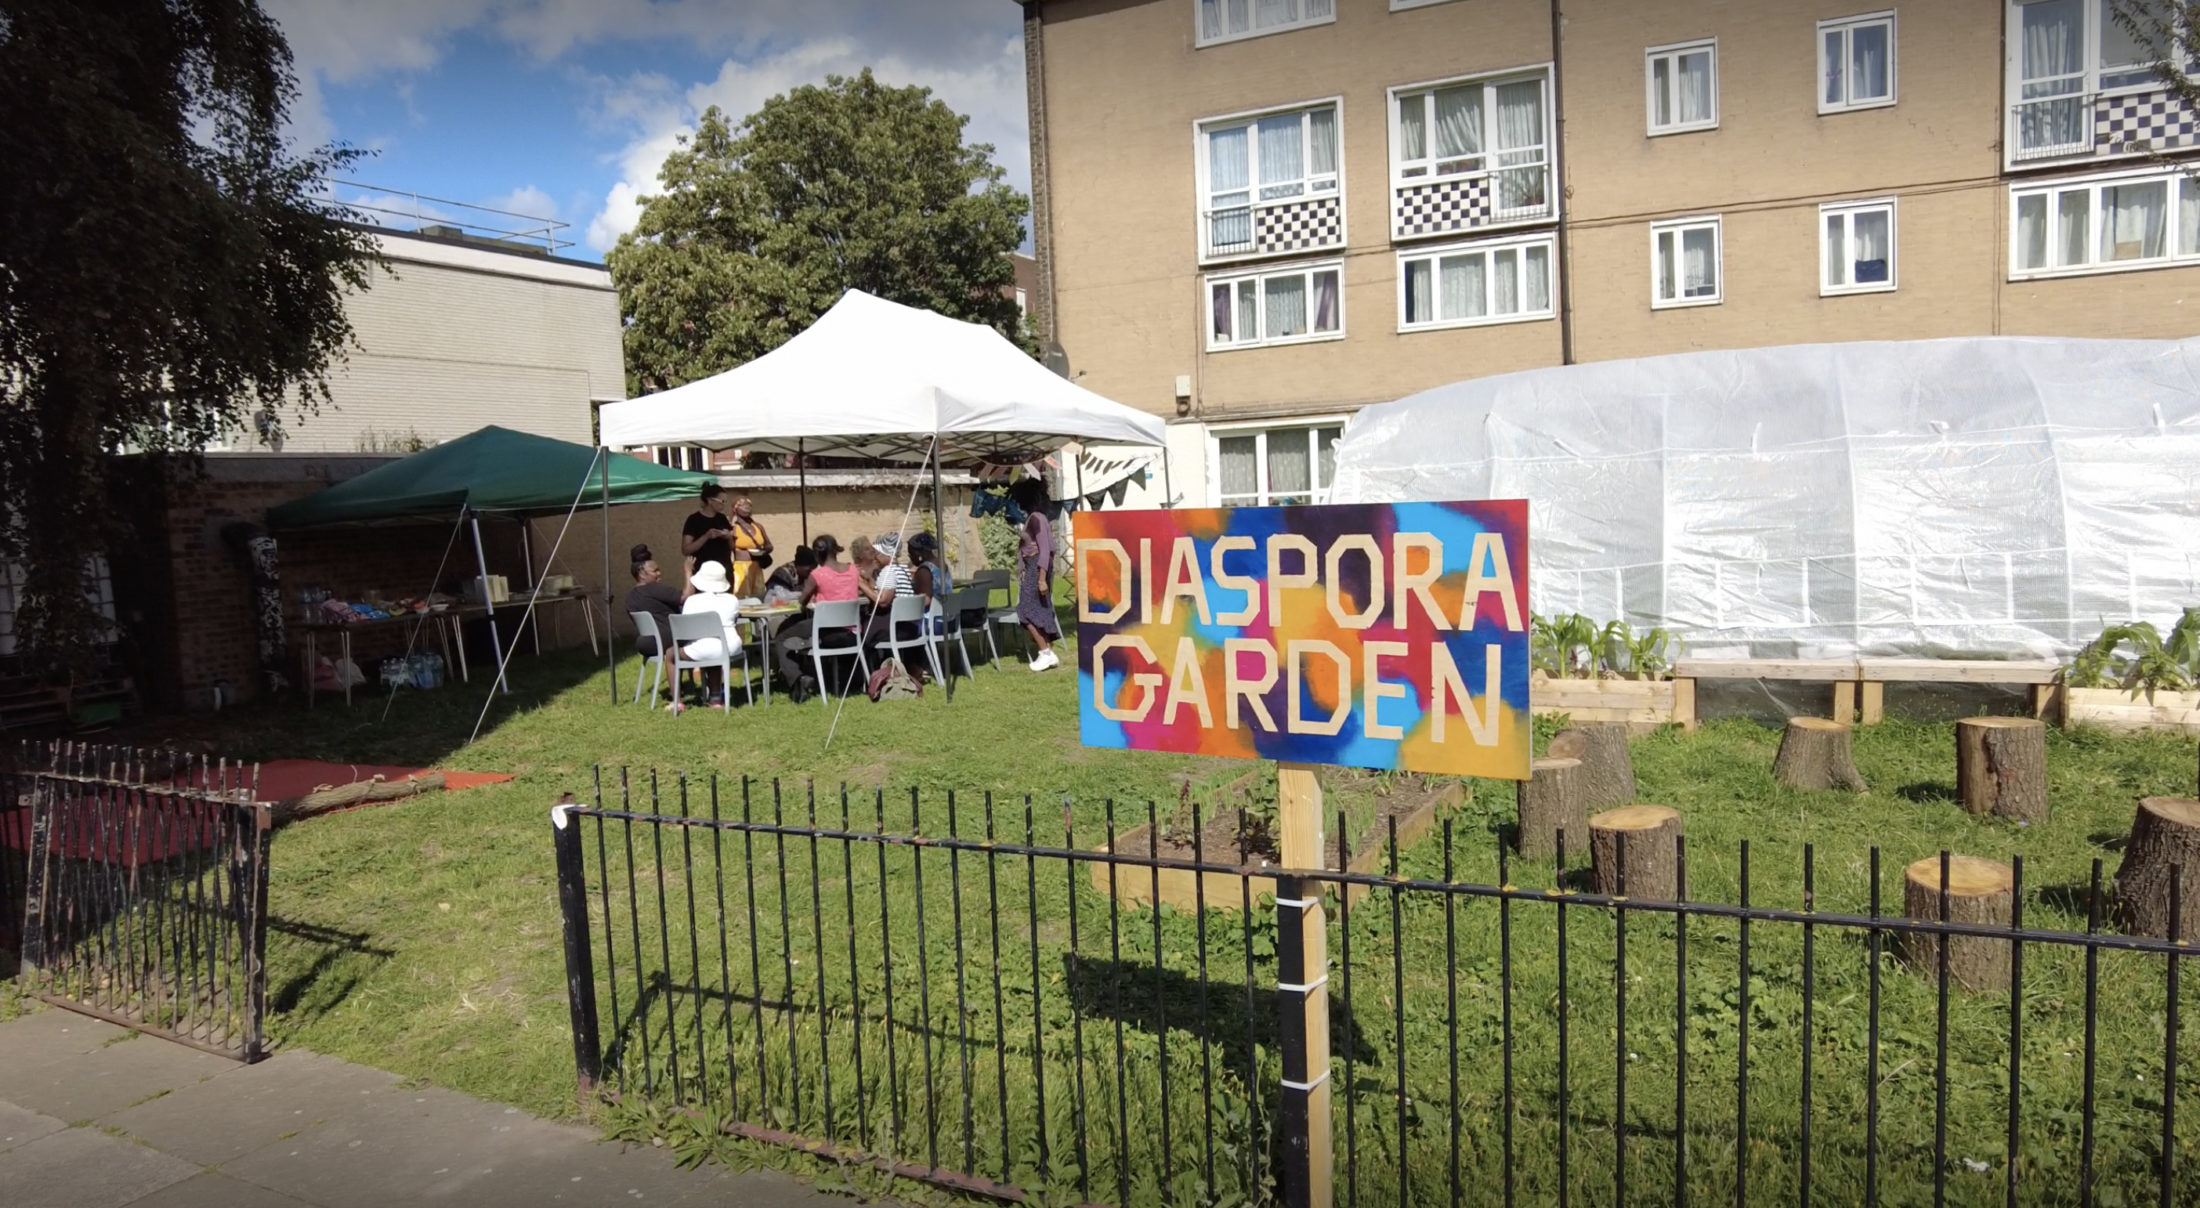 A green park space outside of a block of flats. People sit under a gazebo to shelter from the sun. A colourful sign reads: Diaspora Garden.